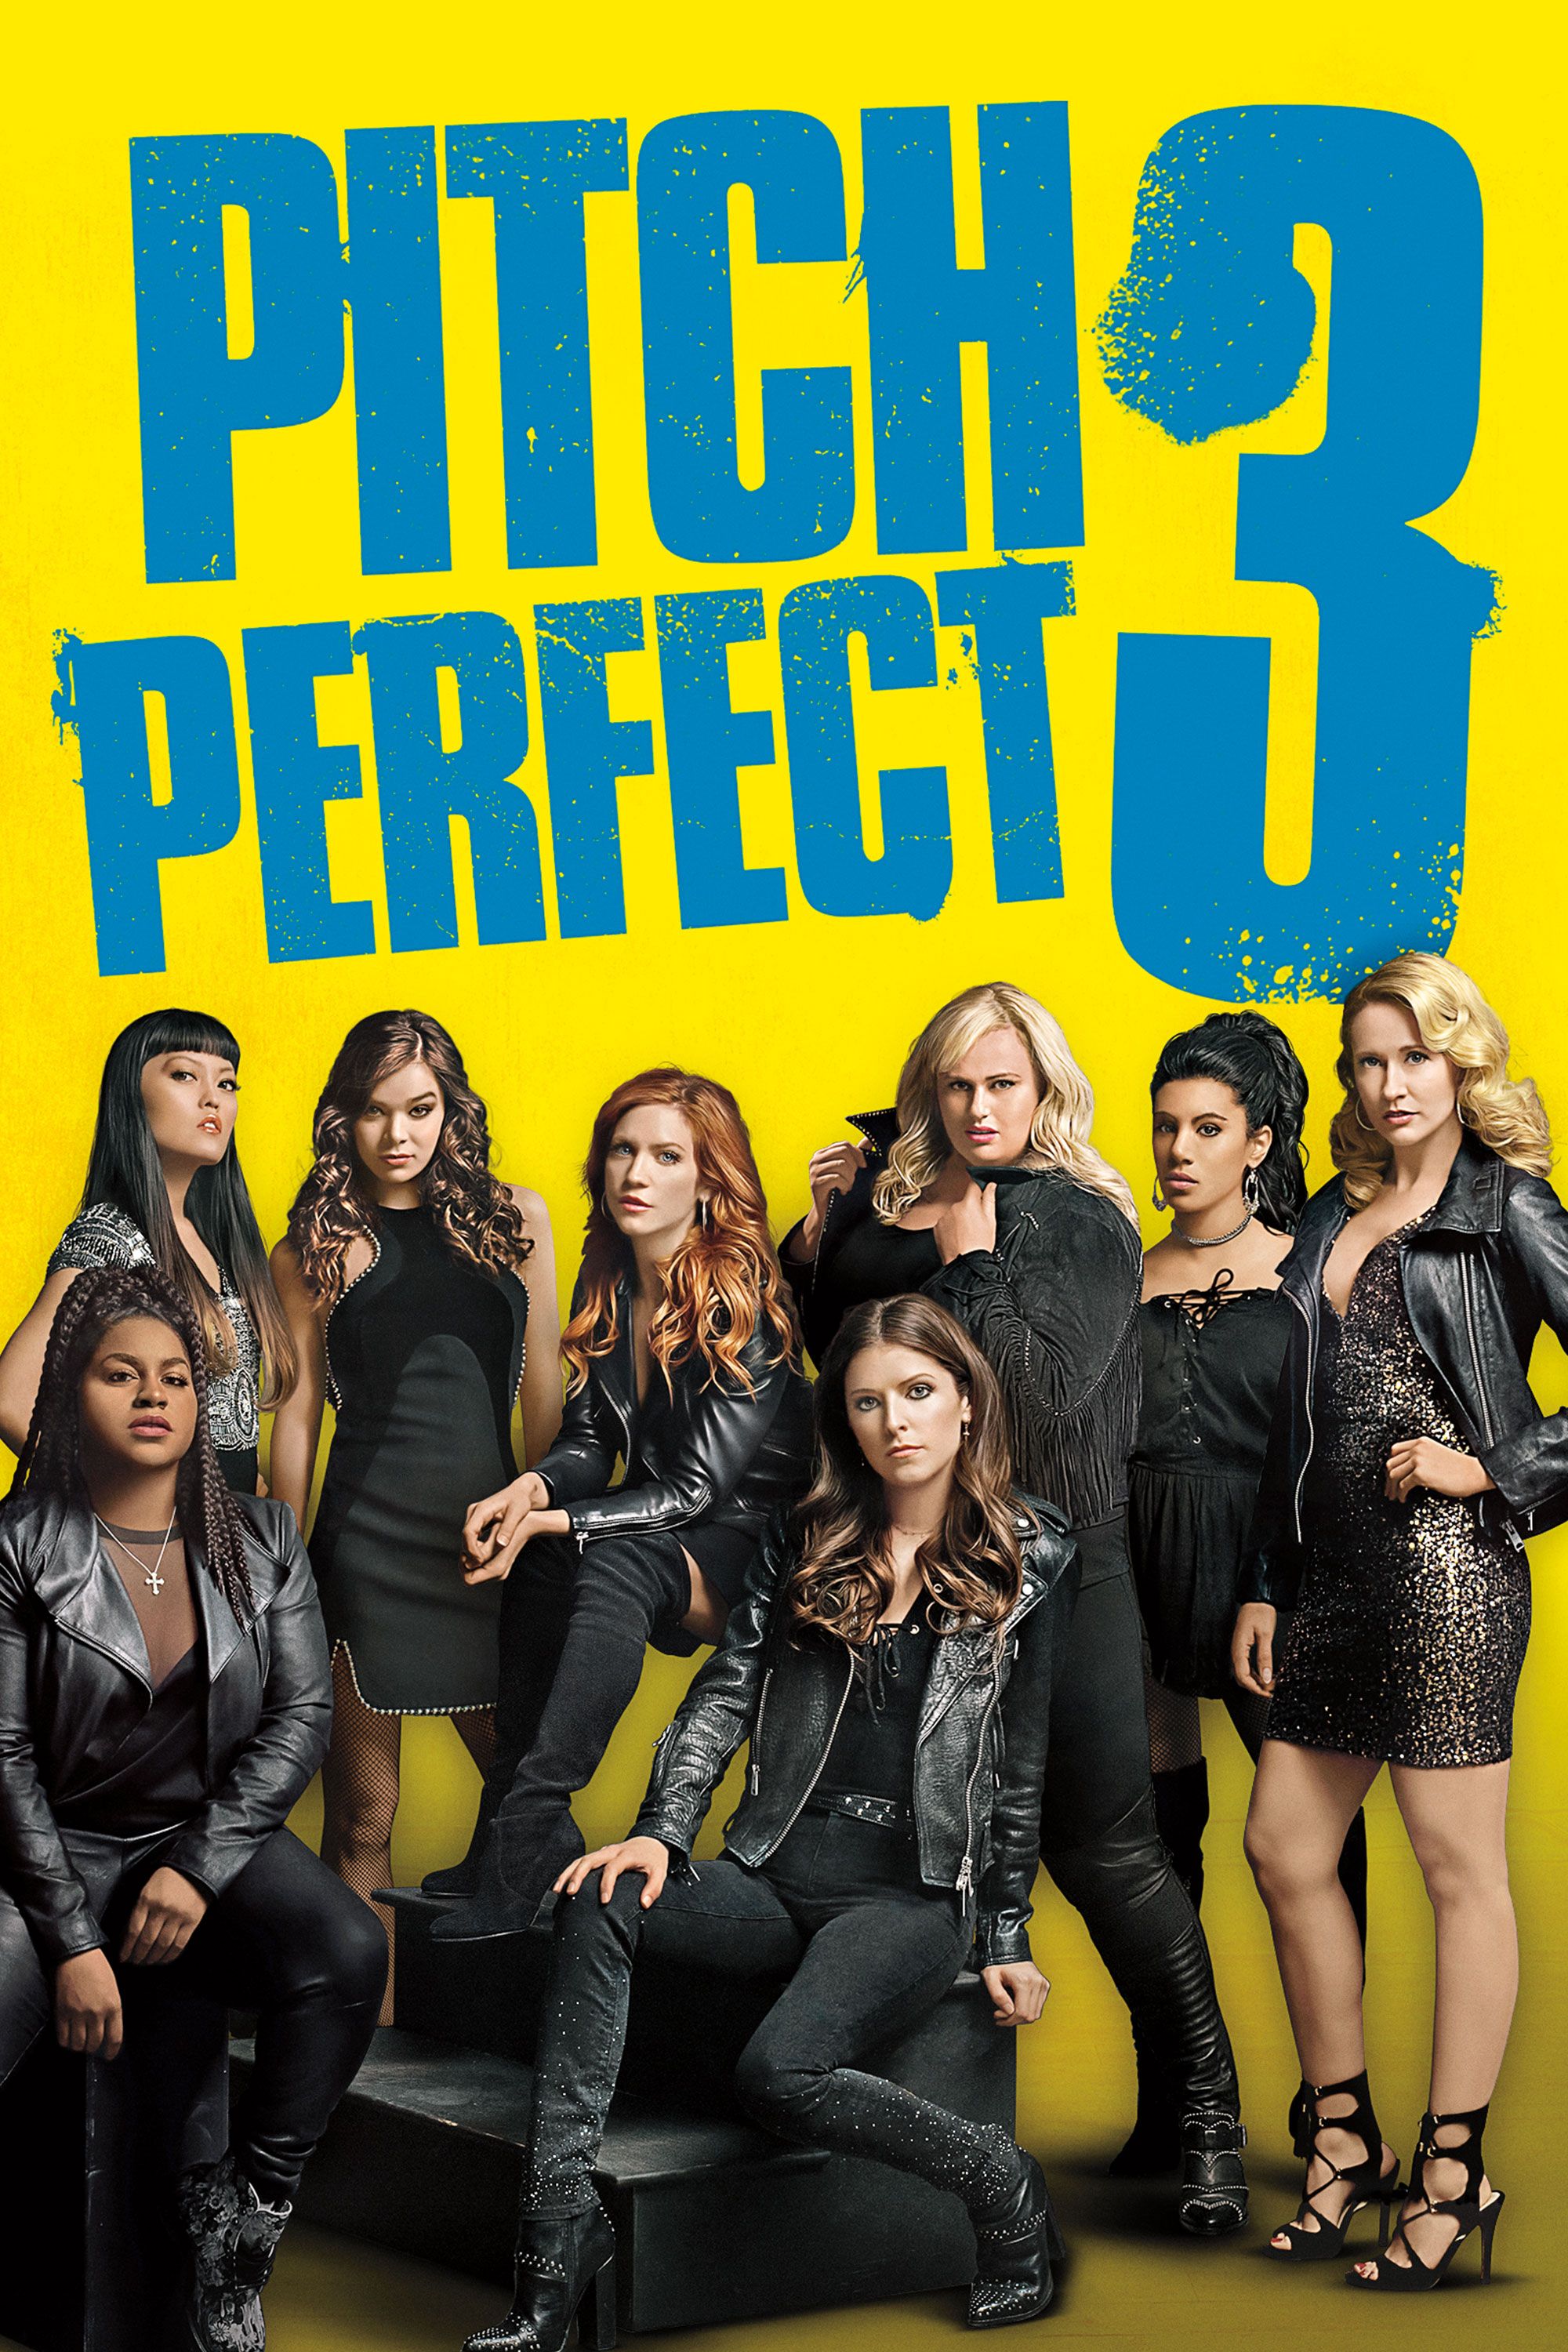 Pitch perfect 3 torrent